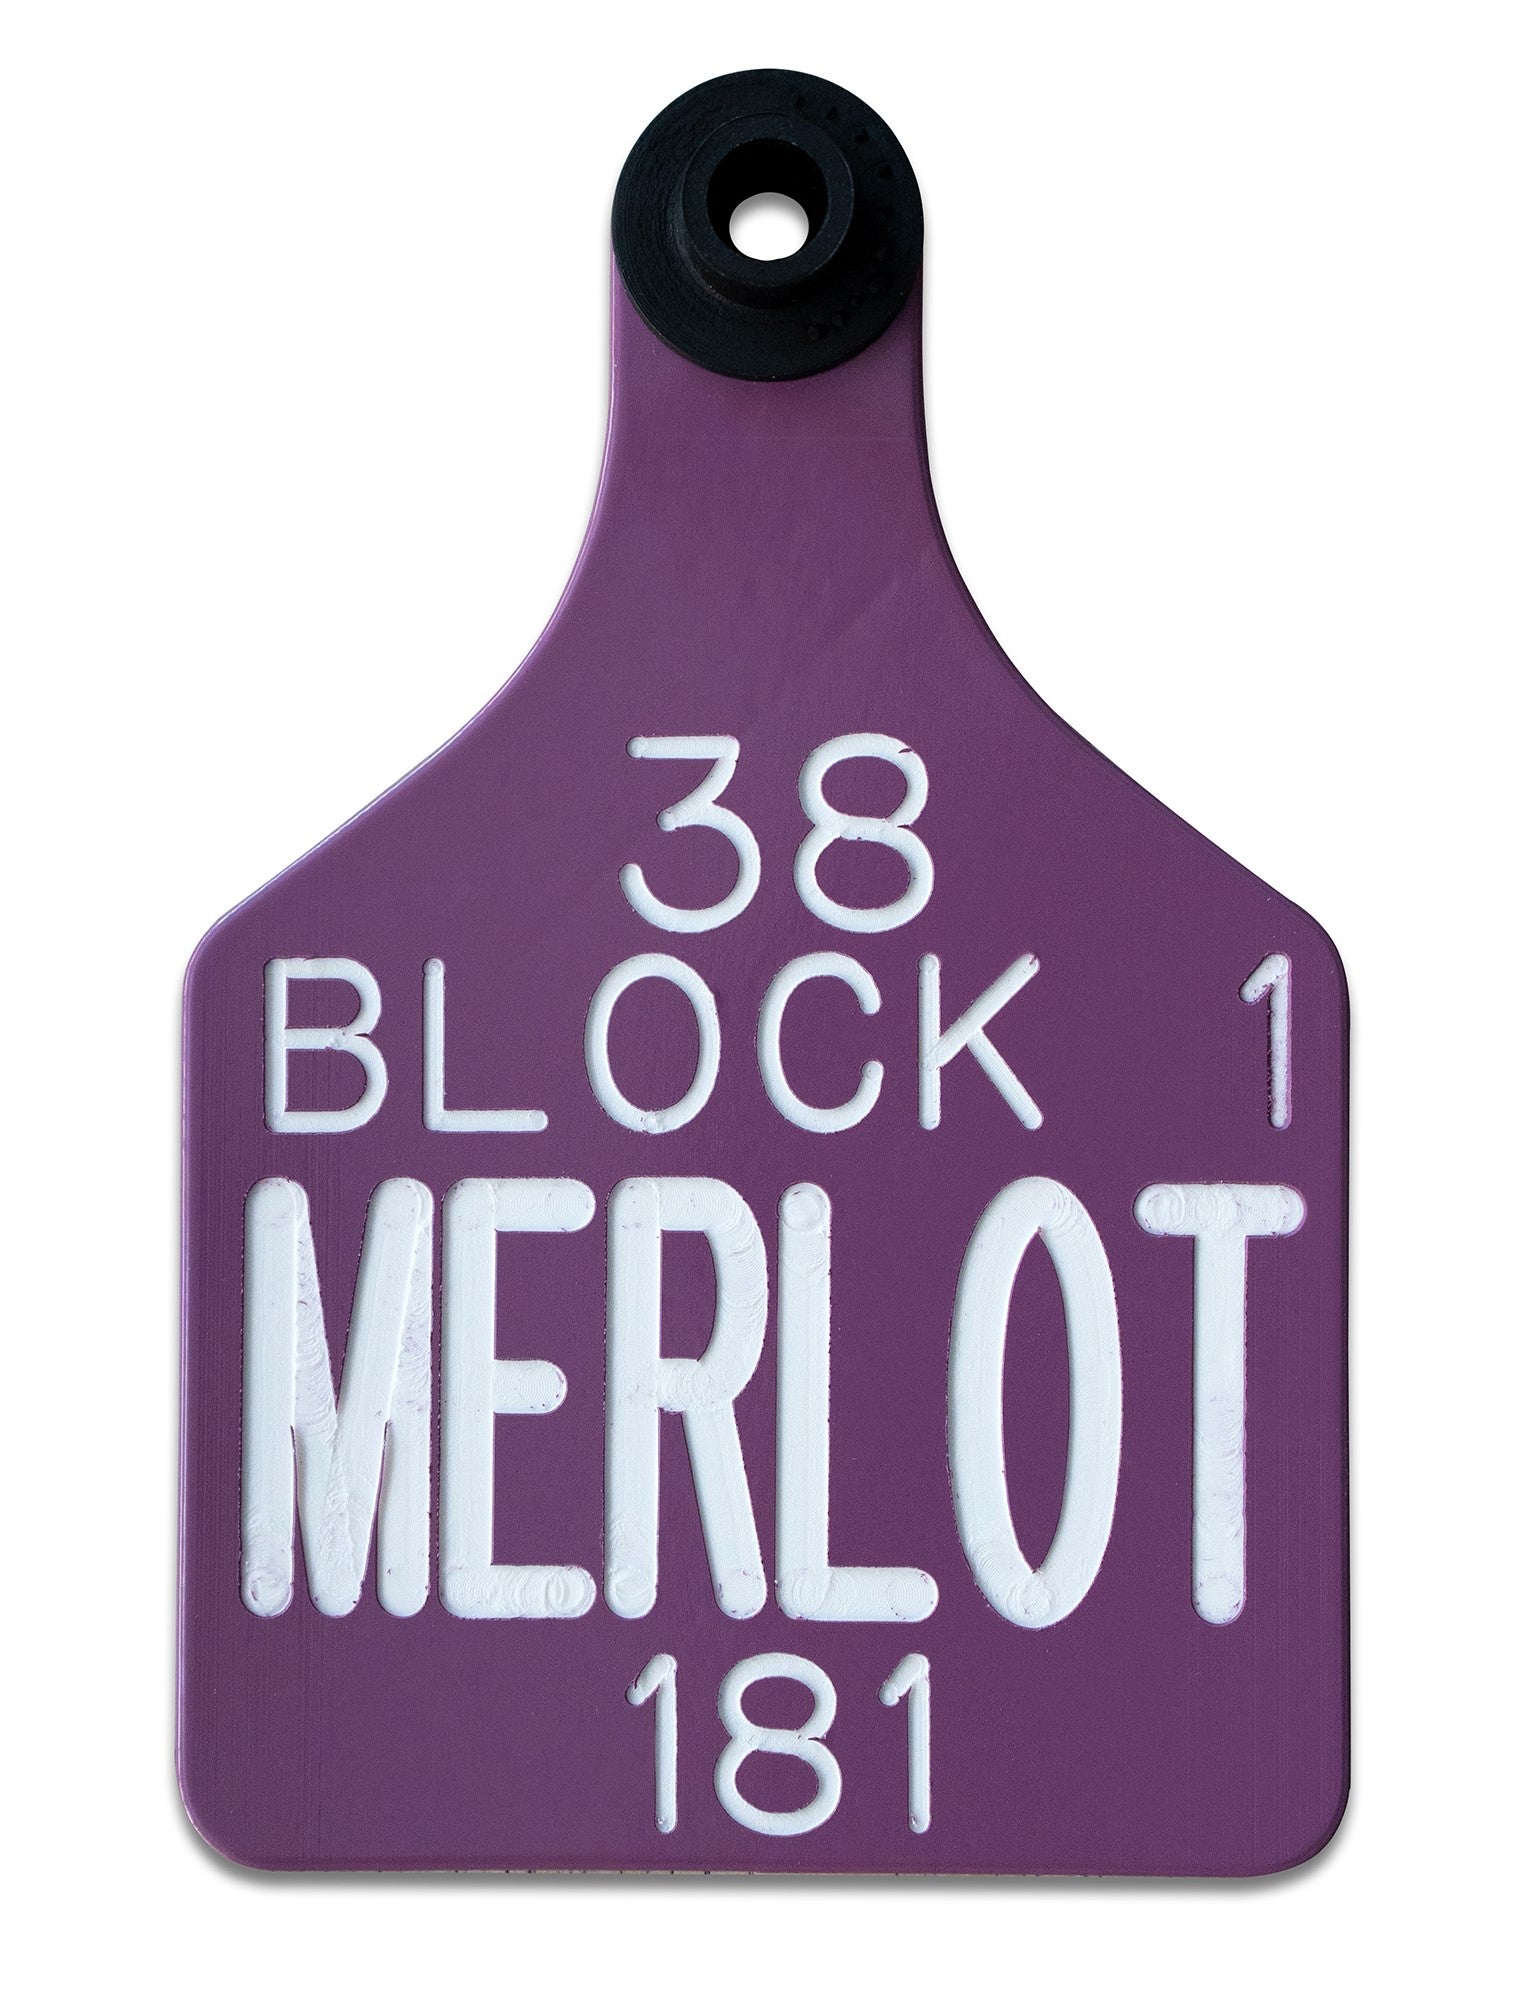 Vineyard tag purple and white in color.  